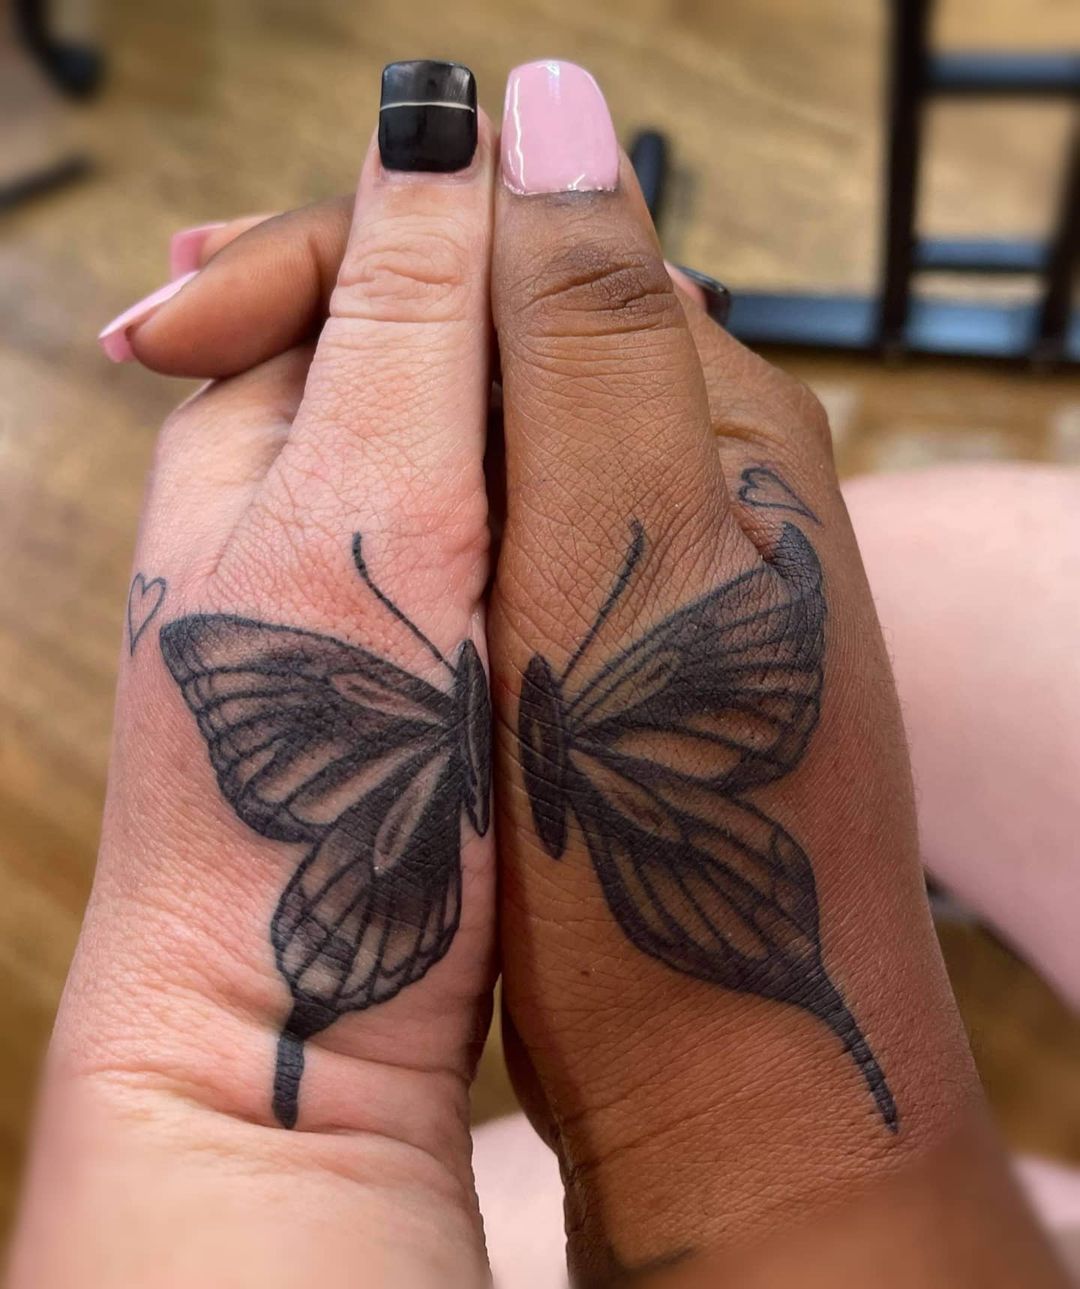 100 Unique Butterfly Tattoo Ideas Best Butterfly Tattoos  The Trend Scout